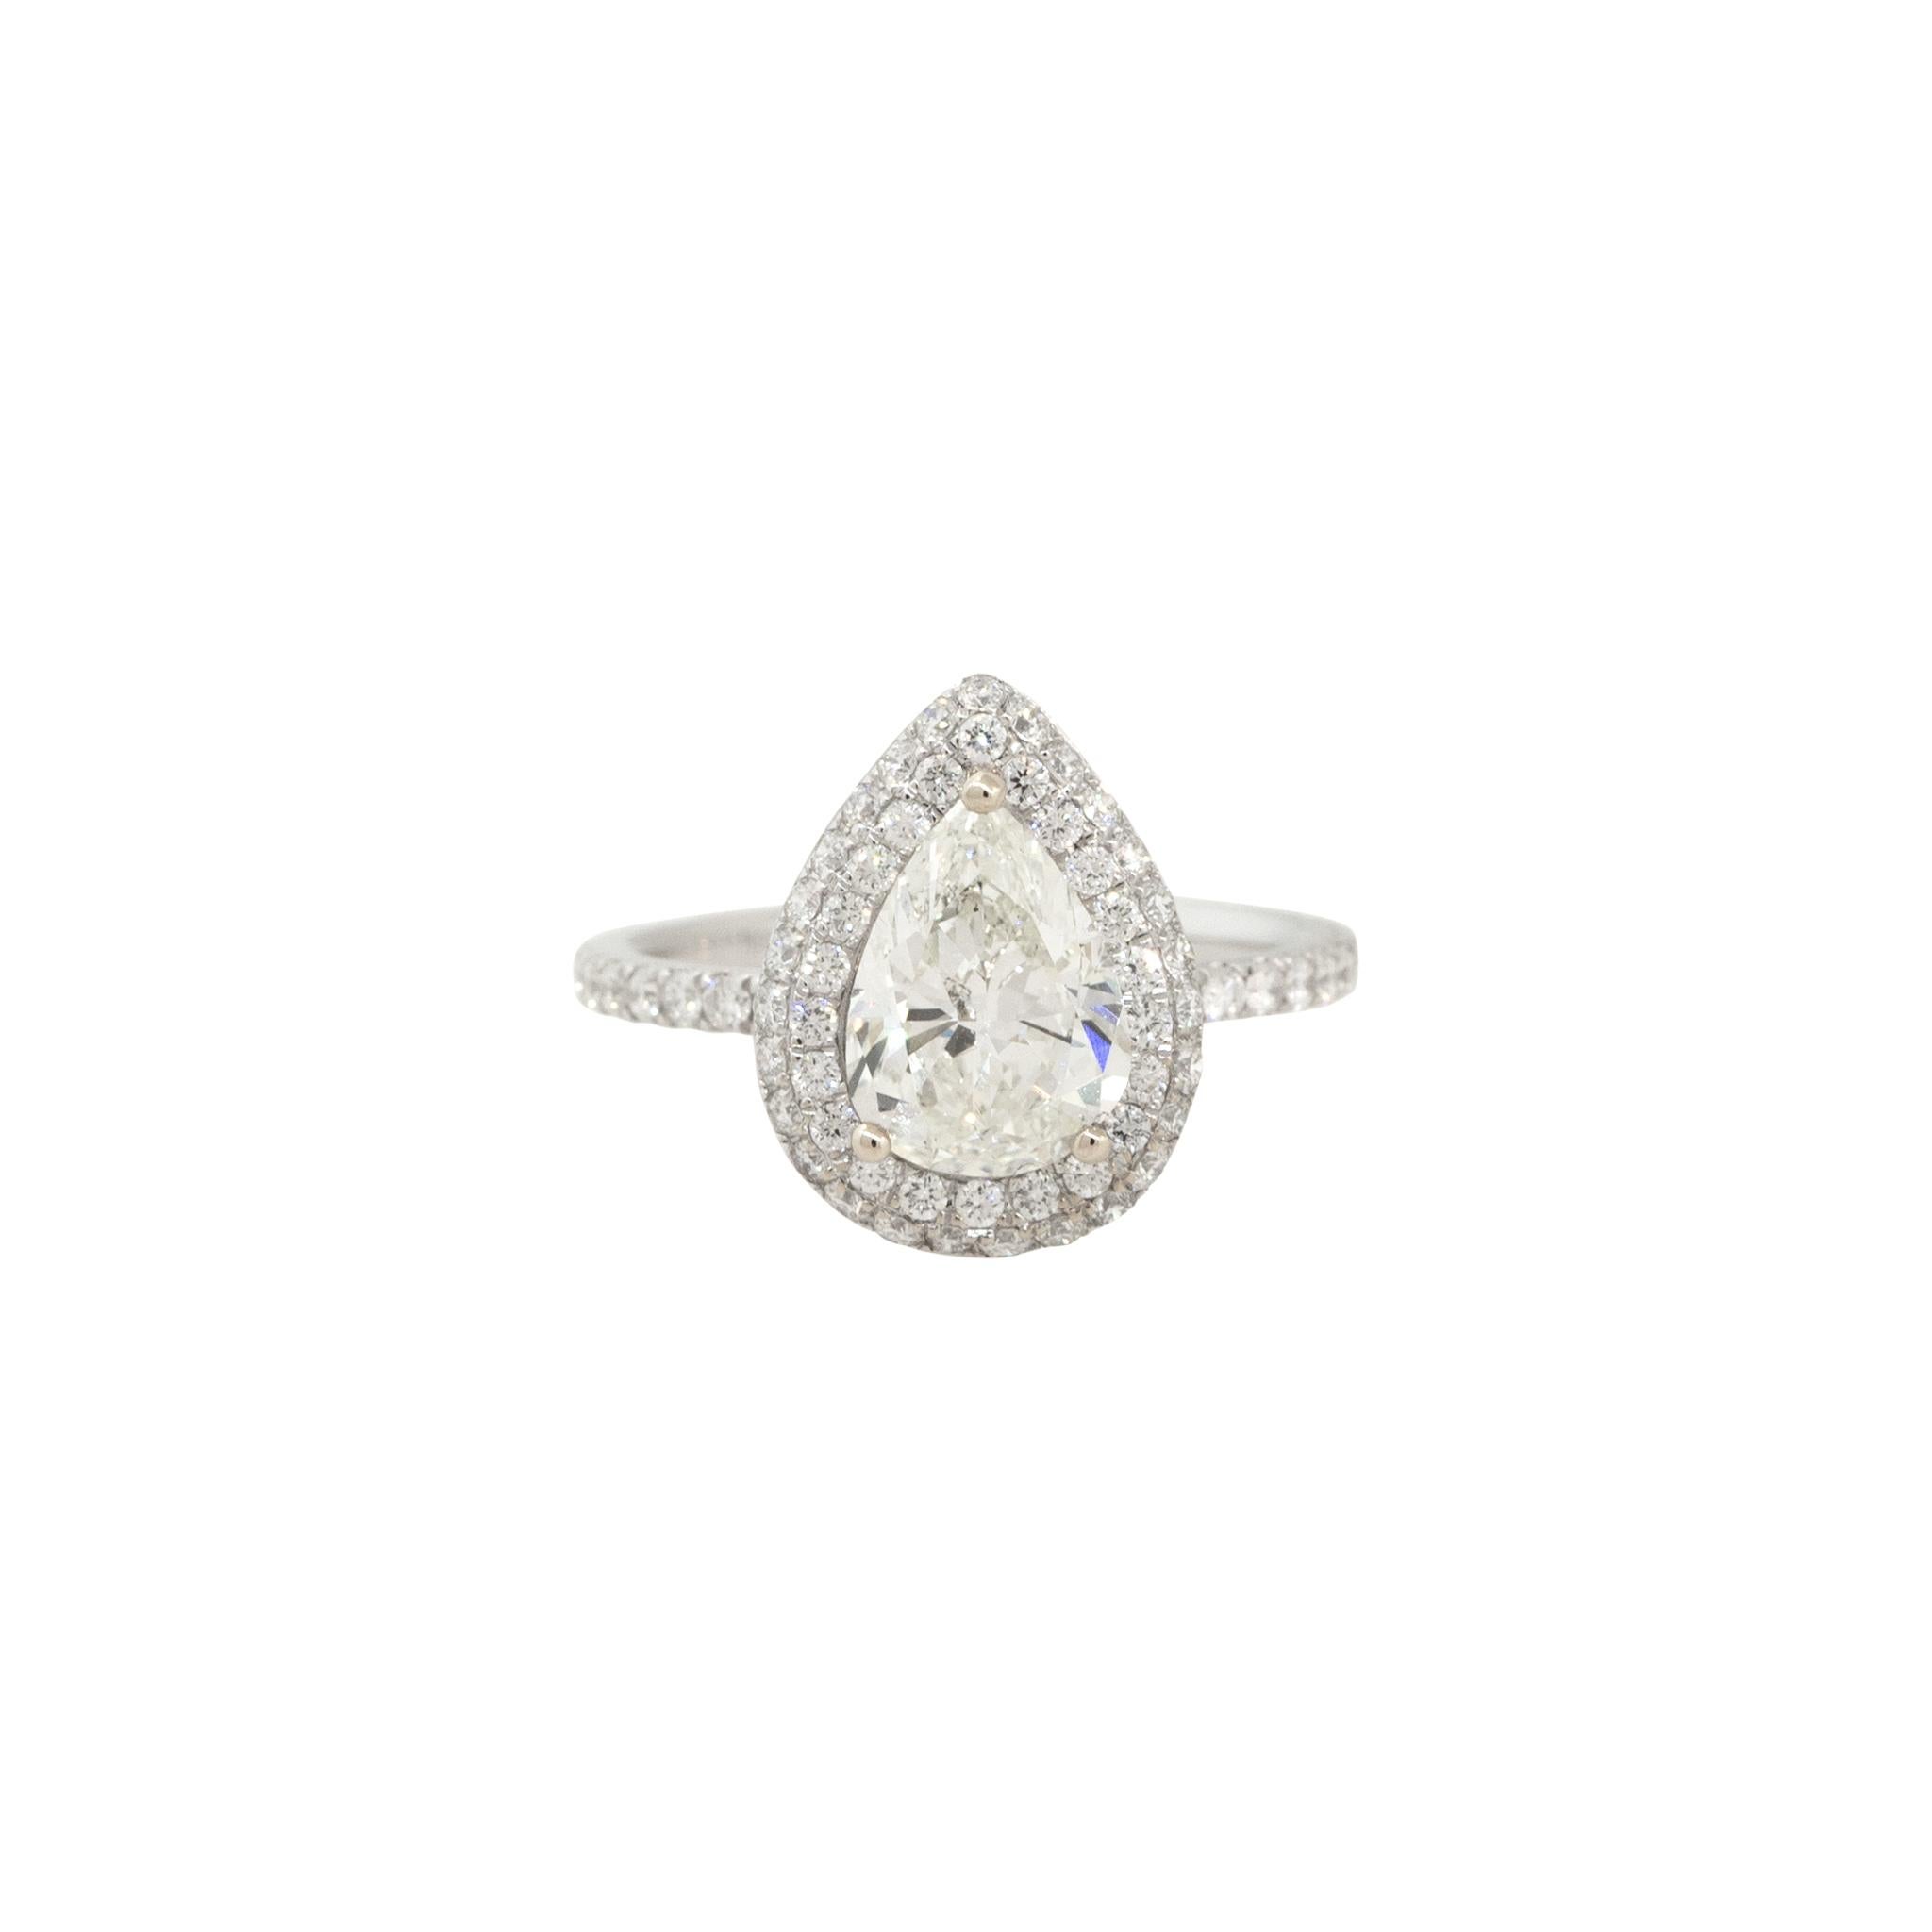 HRD Certified 18k White Gold 2.88ctw Pear Shaped Diamond Engagement Ring

Raymond Lee Jewelers in Boca Raton -- South Florida’s destination for diamonds, fine jewelry, antique jewelry, estate pieces, and vintage jewels.

Style: Women's 3 Prong Halo